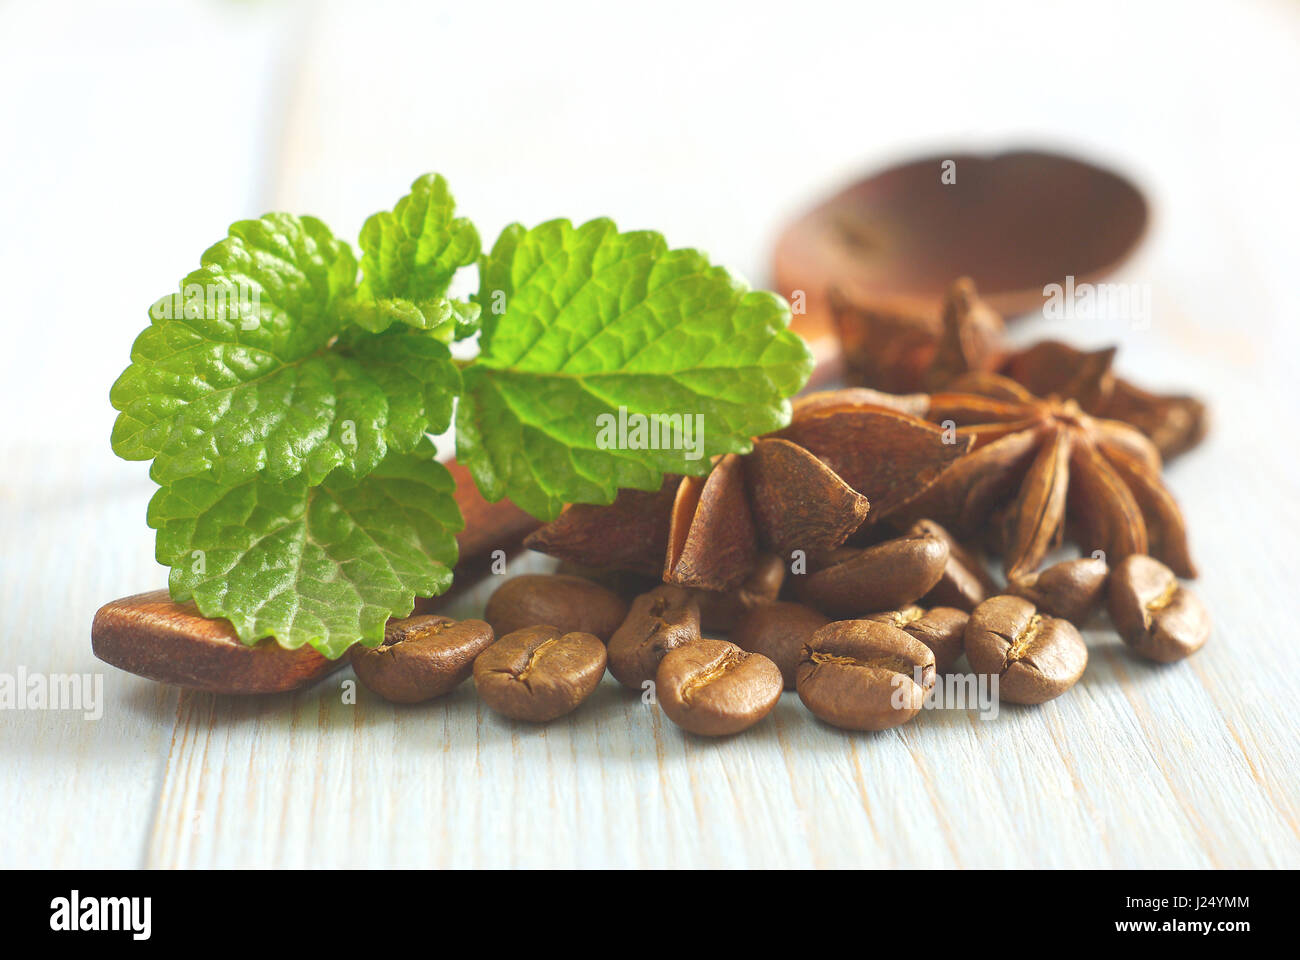 Fresh spearmint leaves, wooden spoon with coffee grains and anise spice star on retro wooden table food background. Selective focus. Aroma spicy caffe Stock Photo